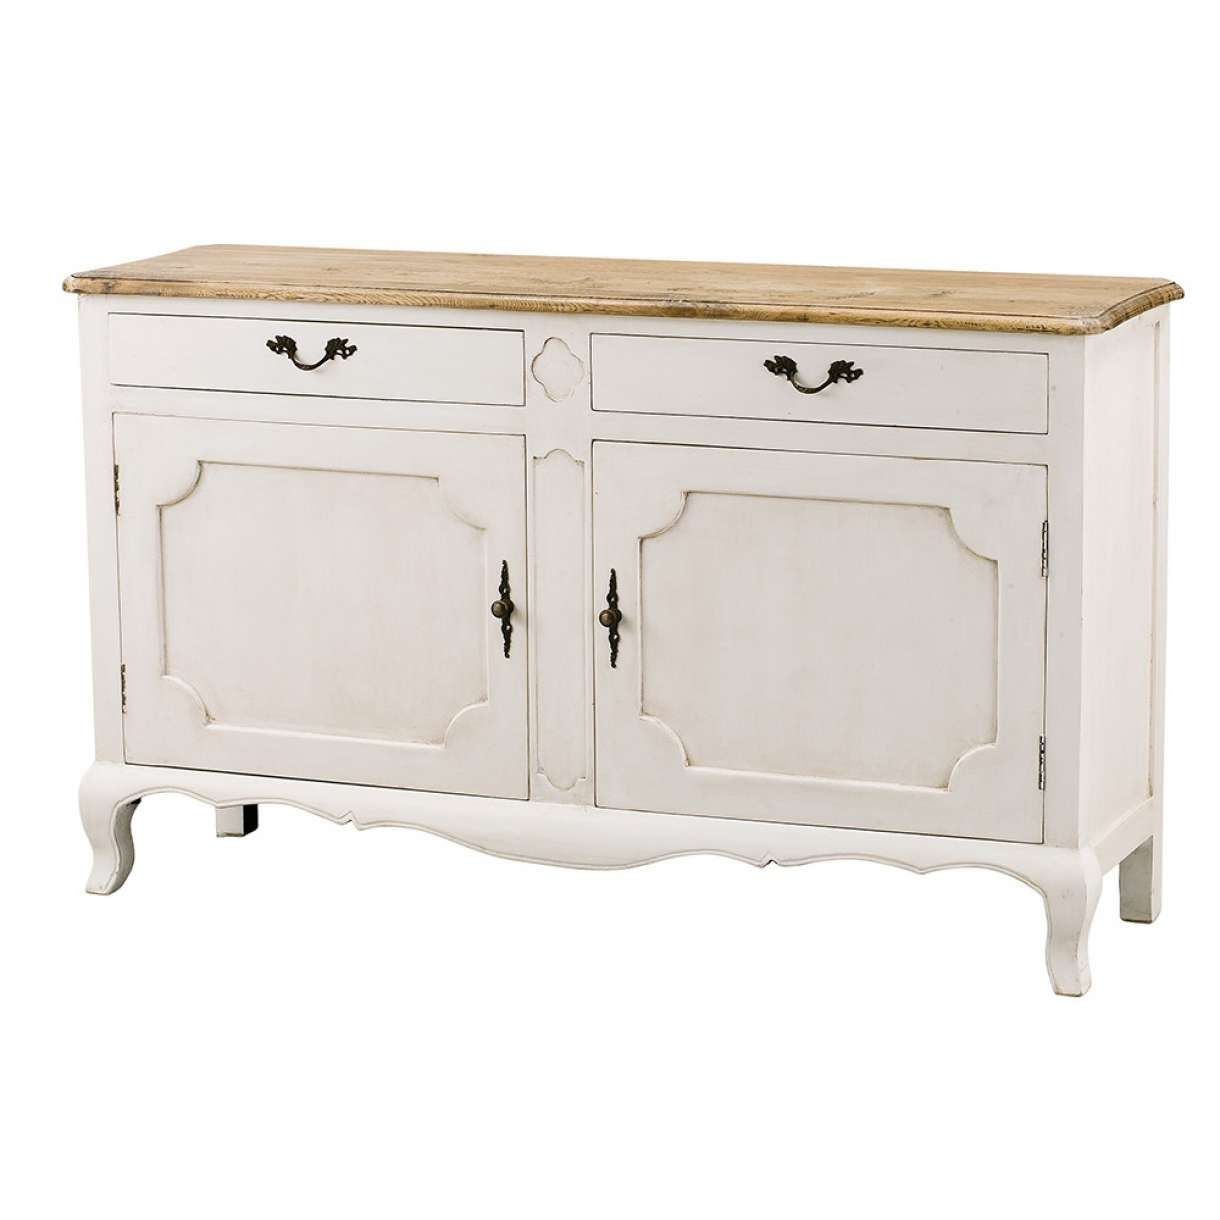 Oak Sideboard Distressed White Within Distressed Buffet Sideboards (View 13 of 20)